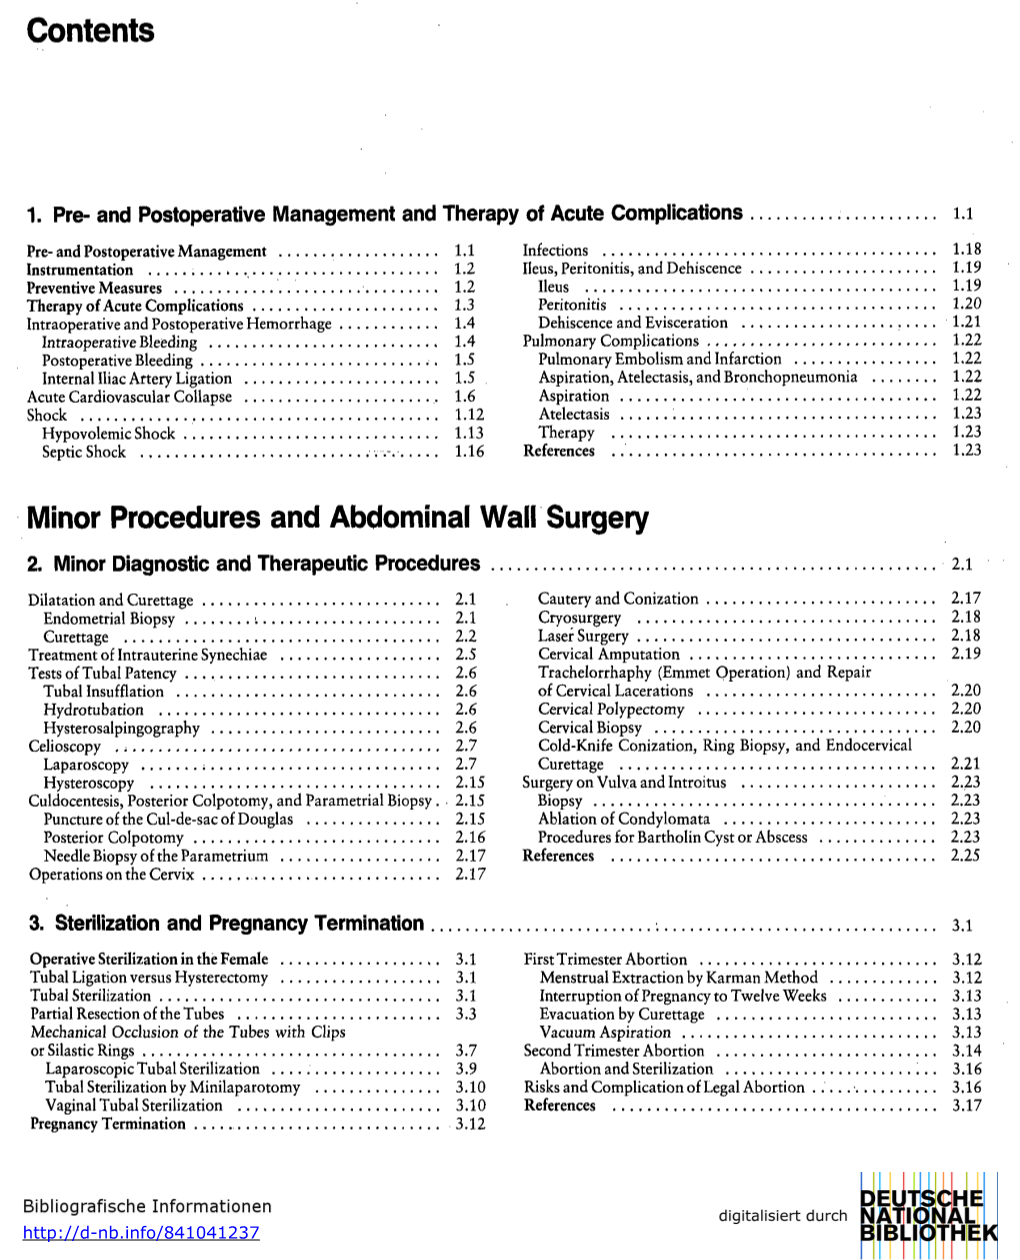 Contents Minor Procedures and Abdominal Wall Surgery